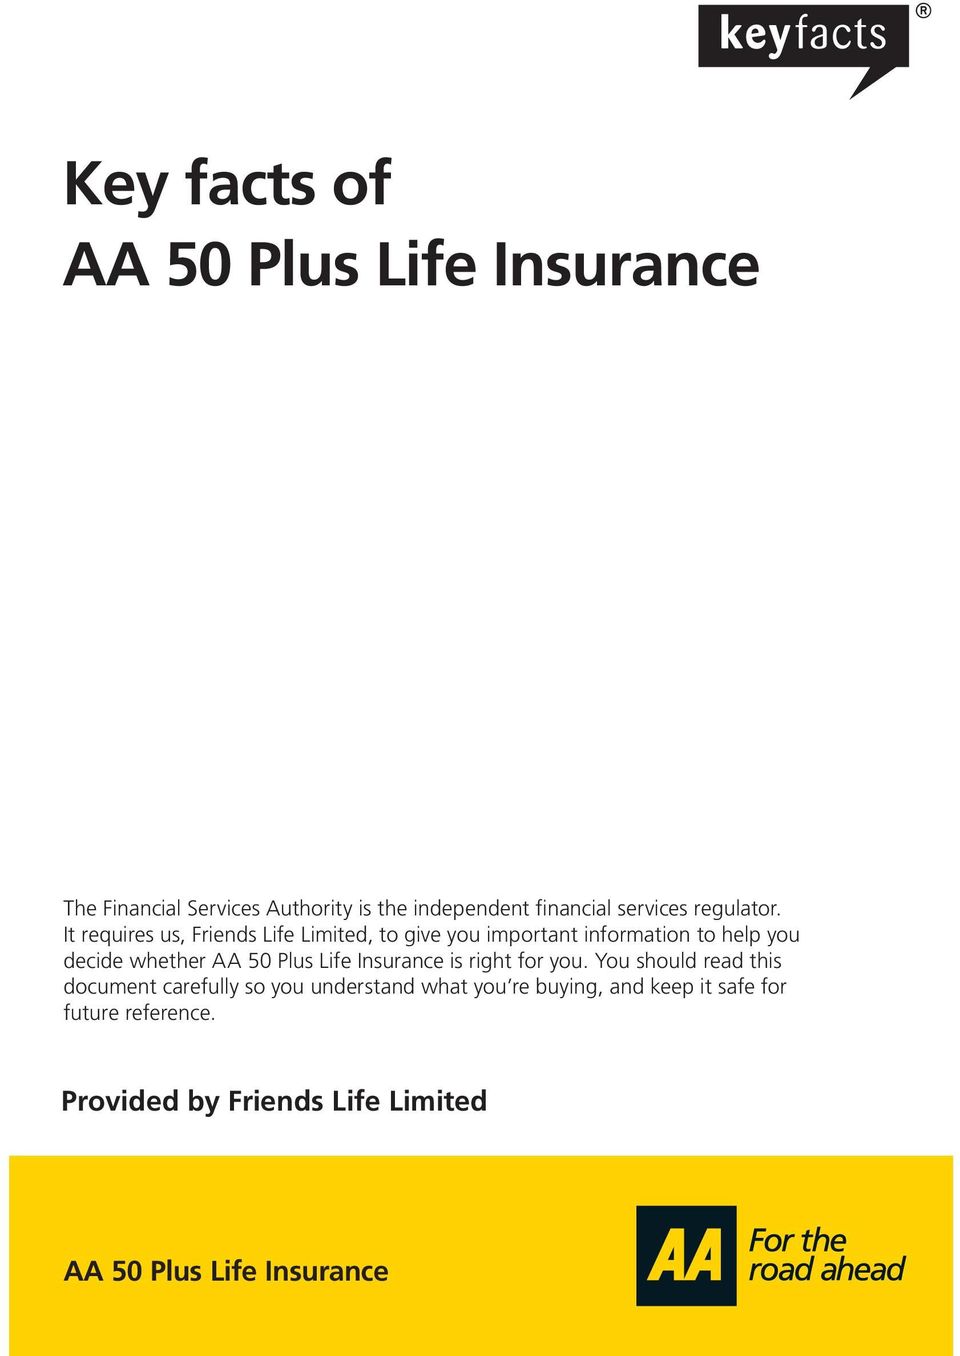 It requires us, Friends Life Limited, to give you important information to help you decide whether AA 50 Plus